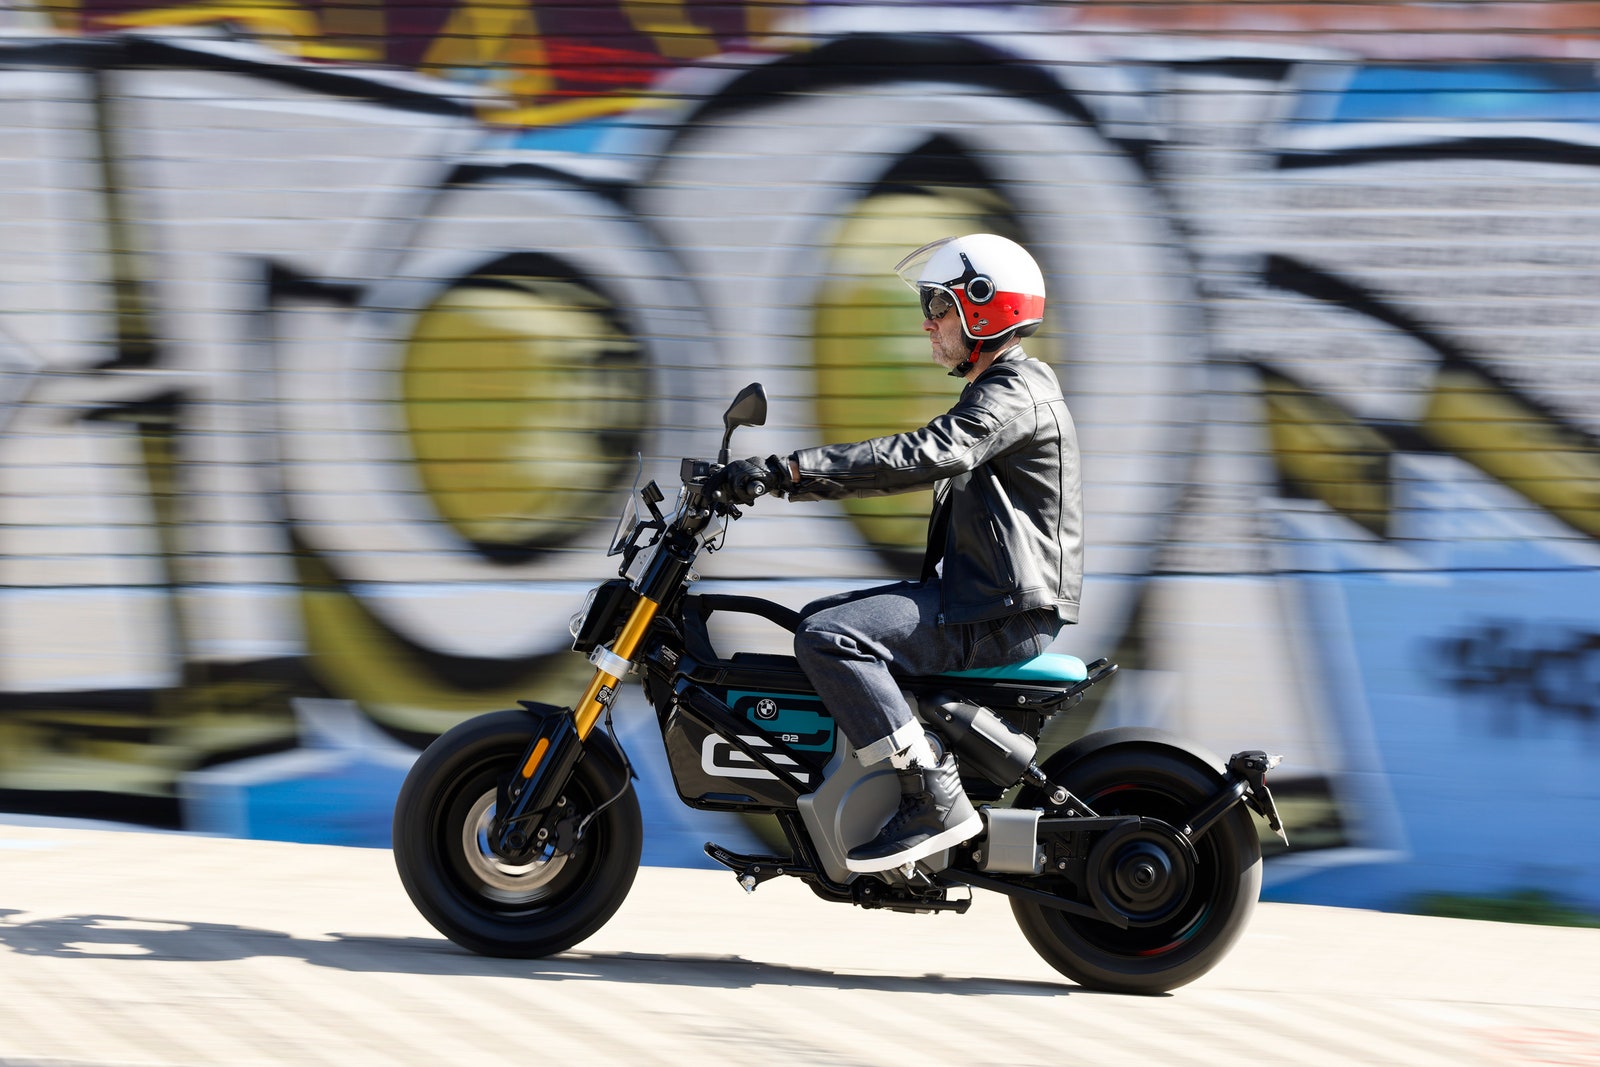 BMW’s Latest E-Motorbike Rides as Good as It Looks